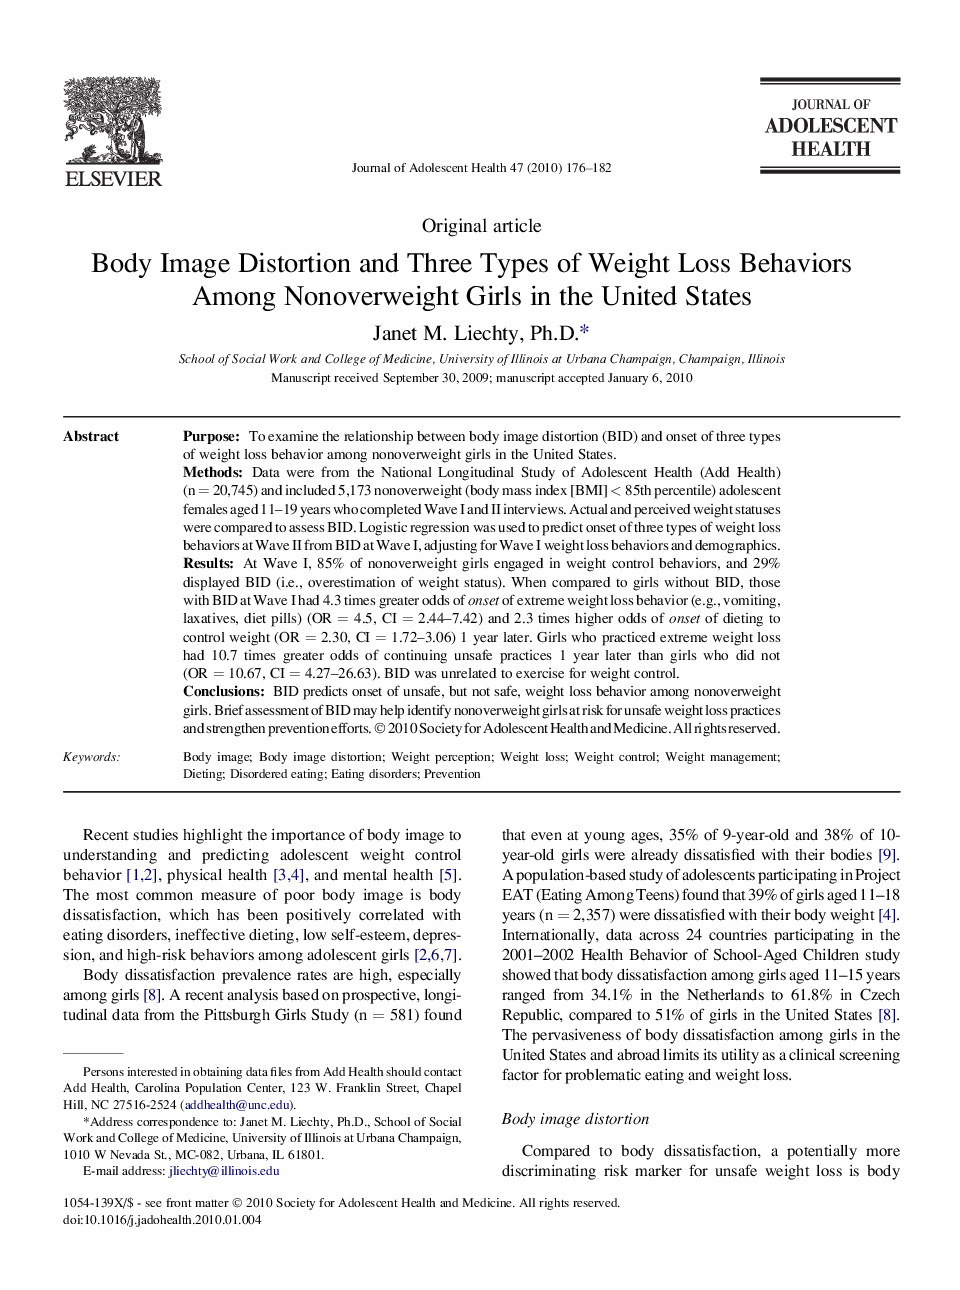 Body Image Distortion and Three Types of Weight Loss Behaviors Among Nonoverweight Girls in the United States 